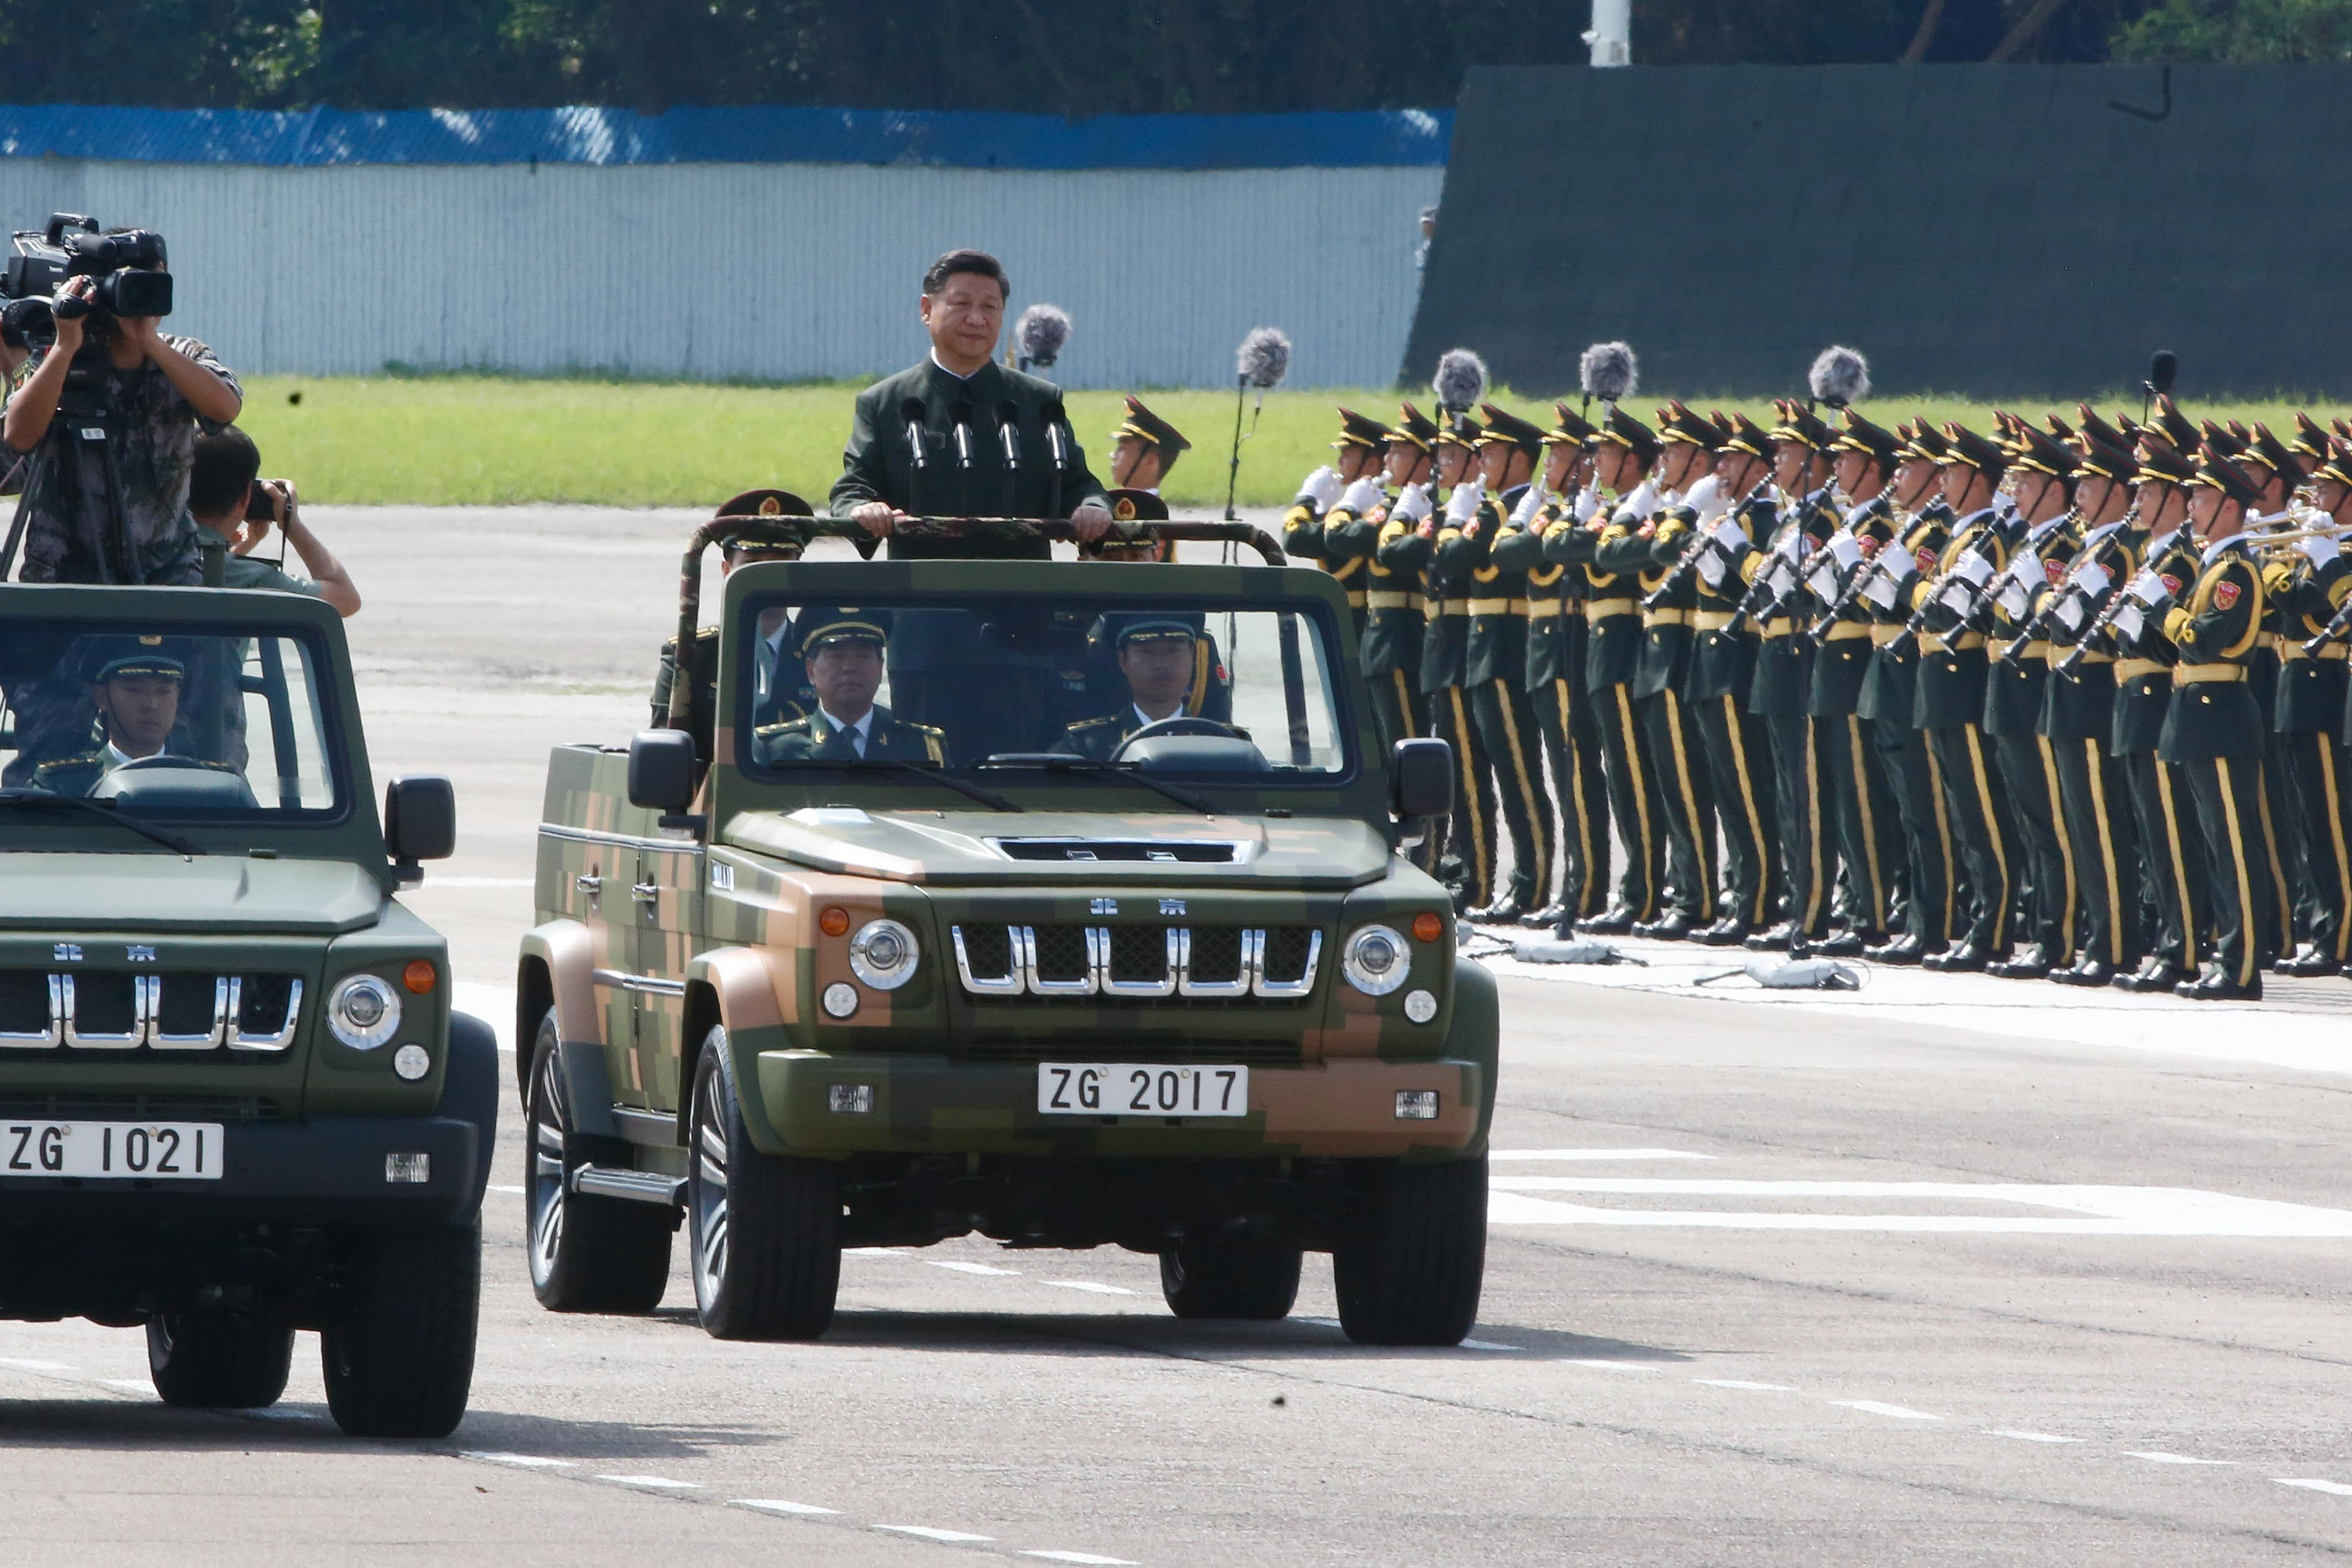 Xi Jinping, China's president, center, rides in a vehicle as he reviews People's Liberation Army (PLA) troops at the Shek Kong Barracks in Hong Kong, China, on Friday, June 30, 2017. (Billy H.C. Kwok/Bloomberg via Getty Images)